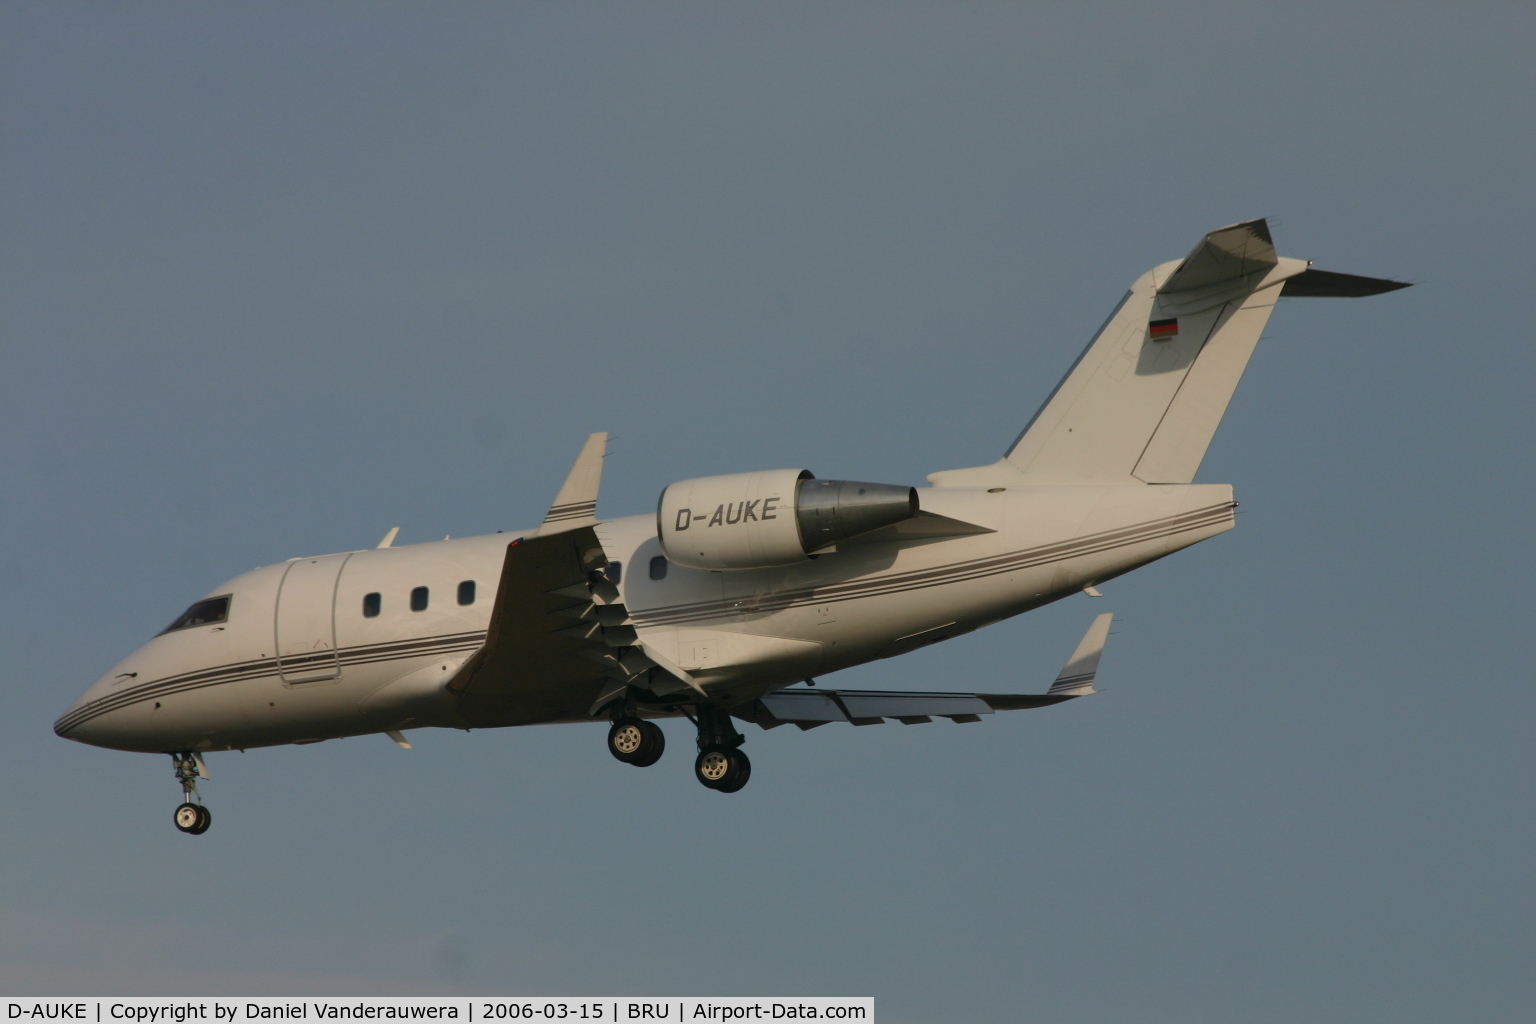 D-AUKE, 1998 Bombardier Challenger 604 (CL-600-2B16) C/N 5389, early arrival on rnw 25L